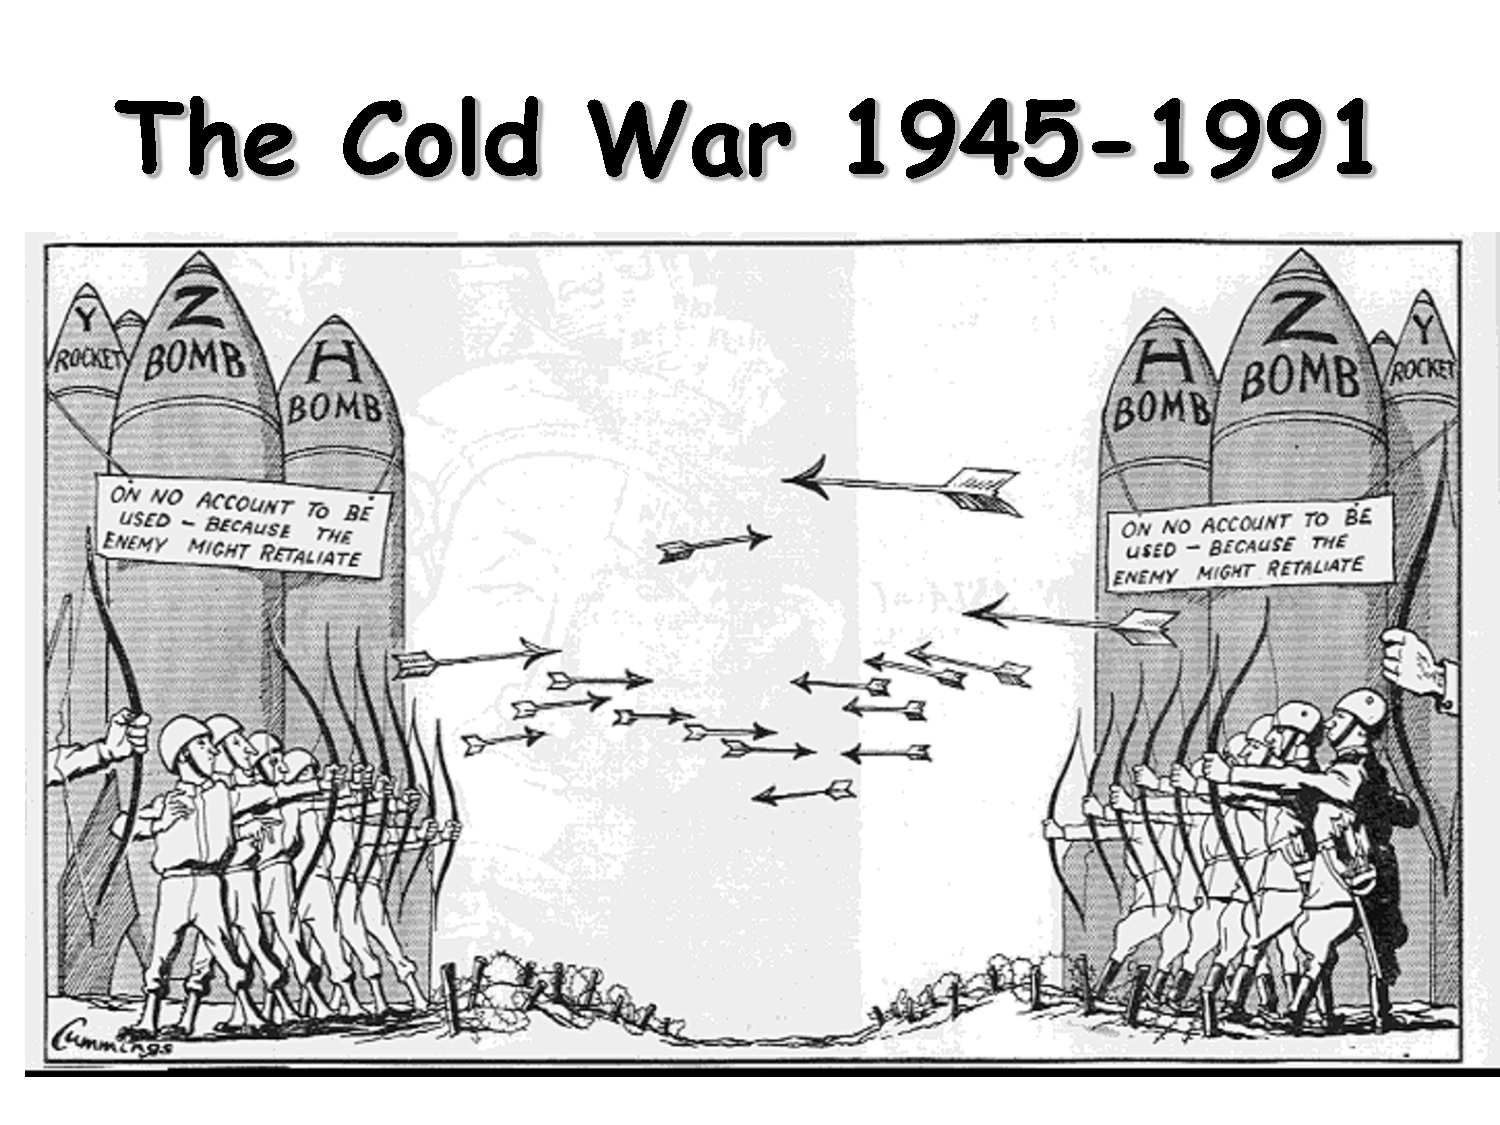 How and why was the USA involved in the Cold War?